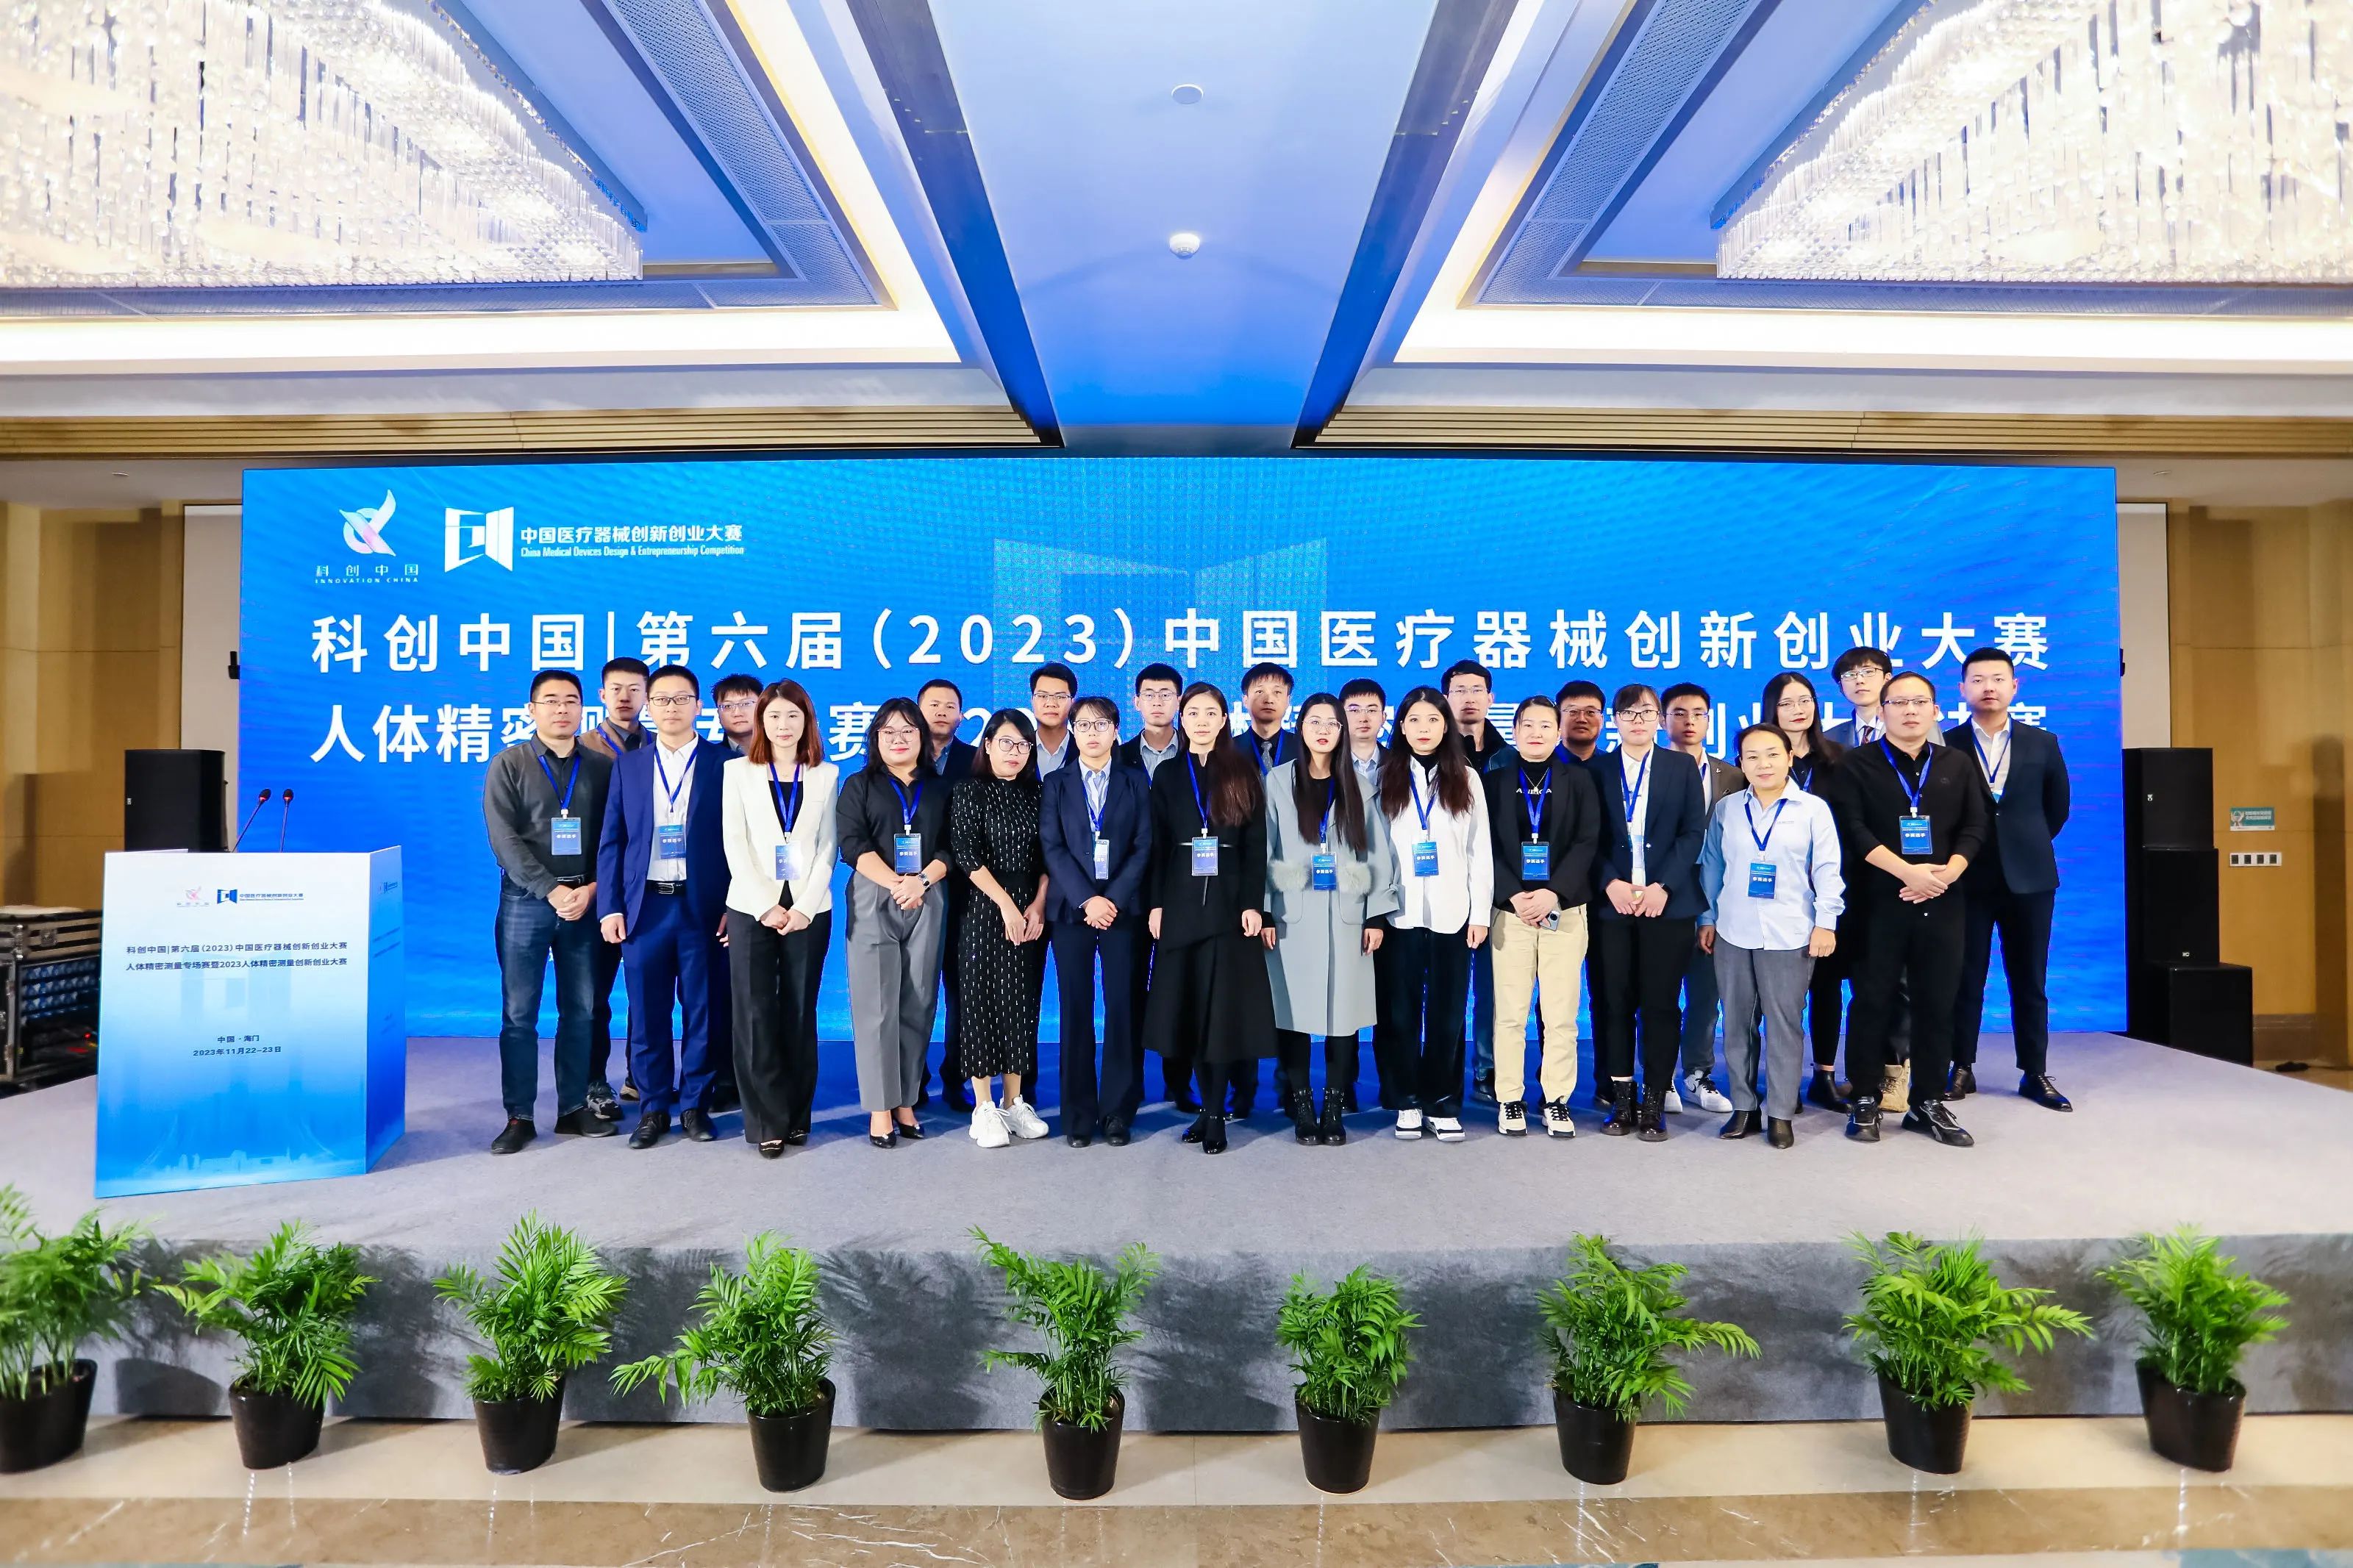 Innovation Leadership, Production and Financing Combination丨The Sixth (2023) China Medical Device Innovation and Entrepreneurship Competition for Human Precision Measurement and the Final of the 2...